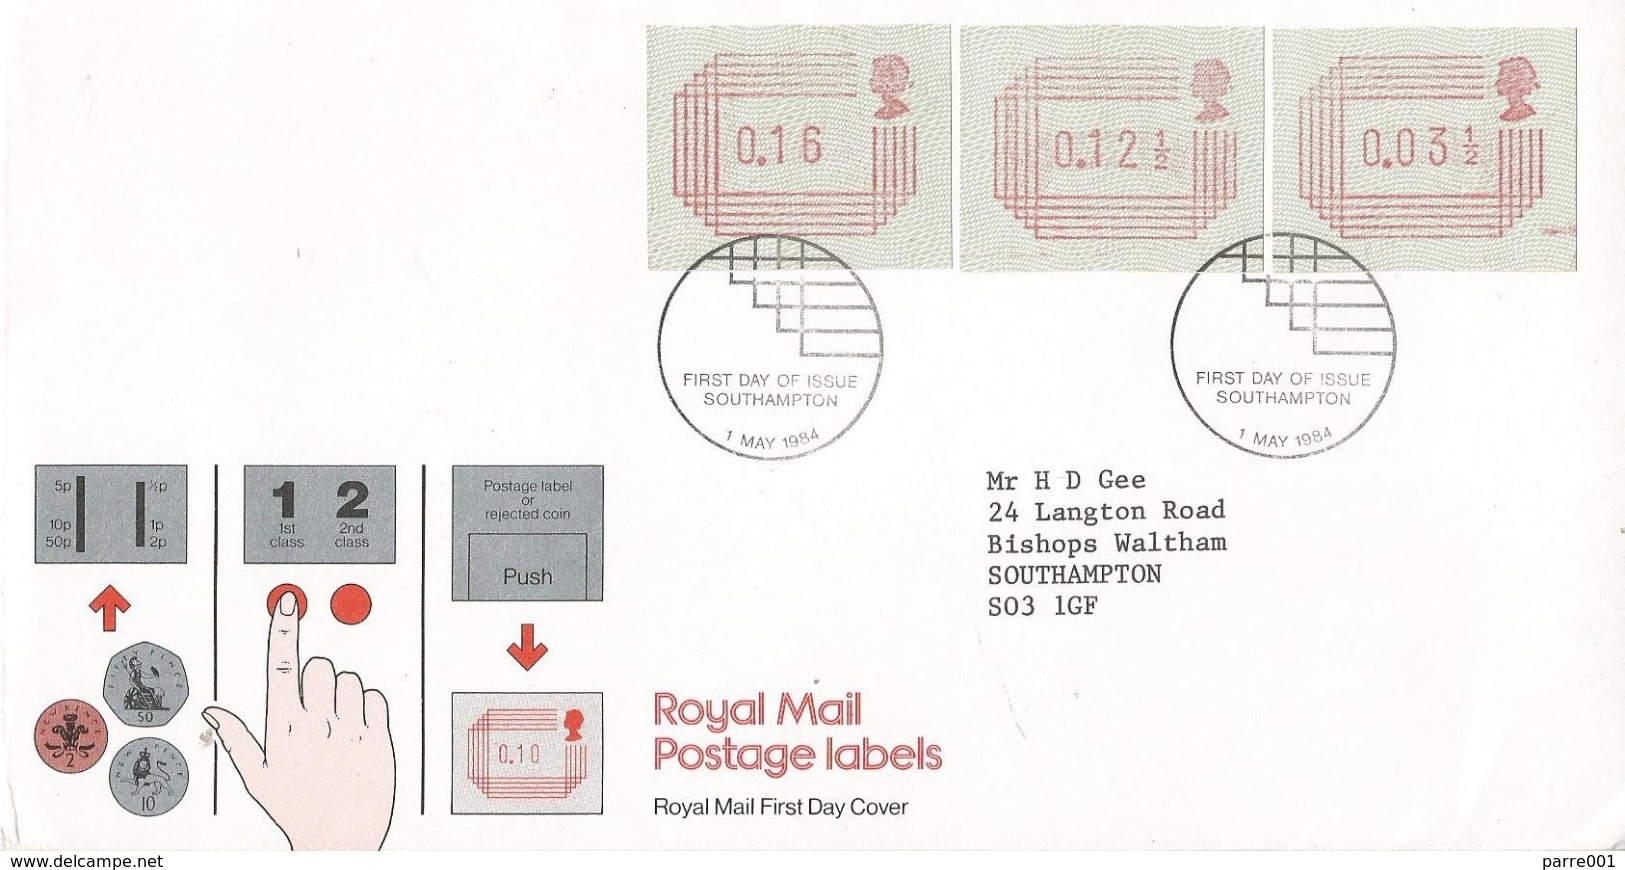 UK 1984 Southampton Postage Labels EMA FRAMA FDC Cover - Post & Go Stamps